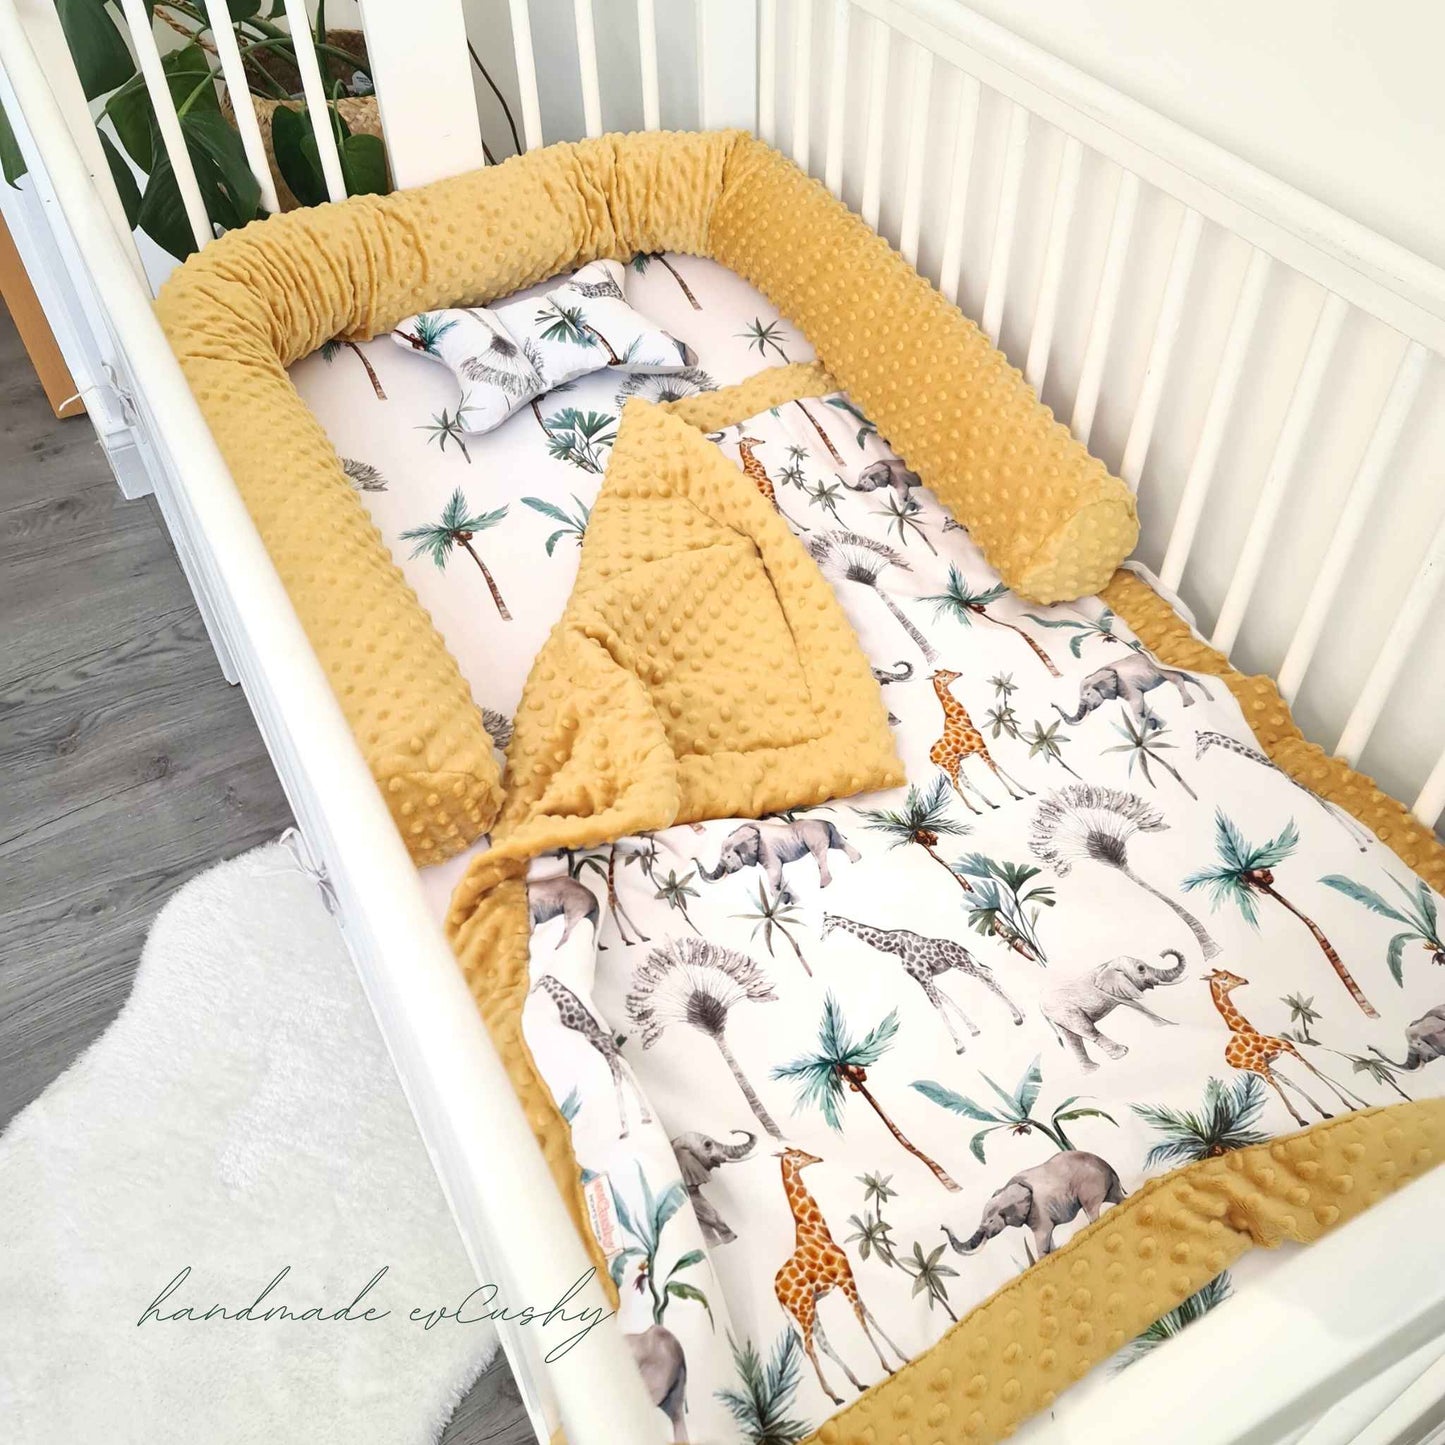 blanket in the cot yellow mustard plush and animals pattern safari matching cot bolster pillow in yellow colour